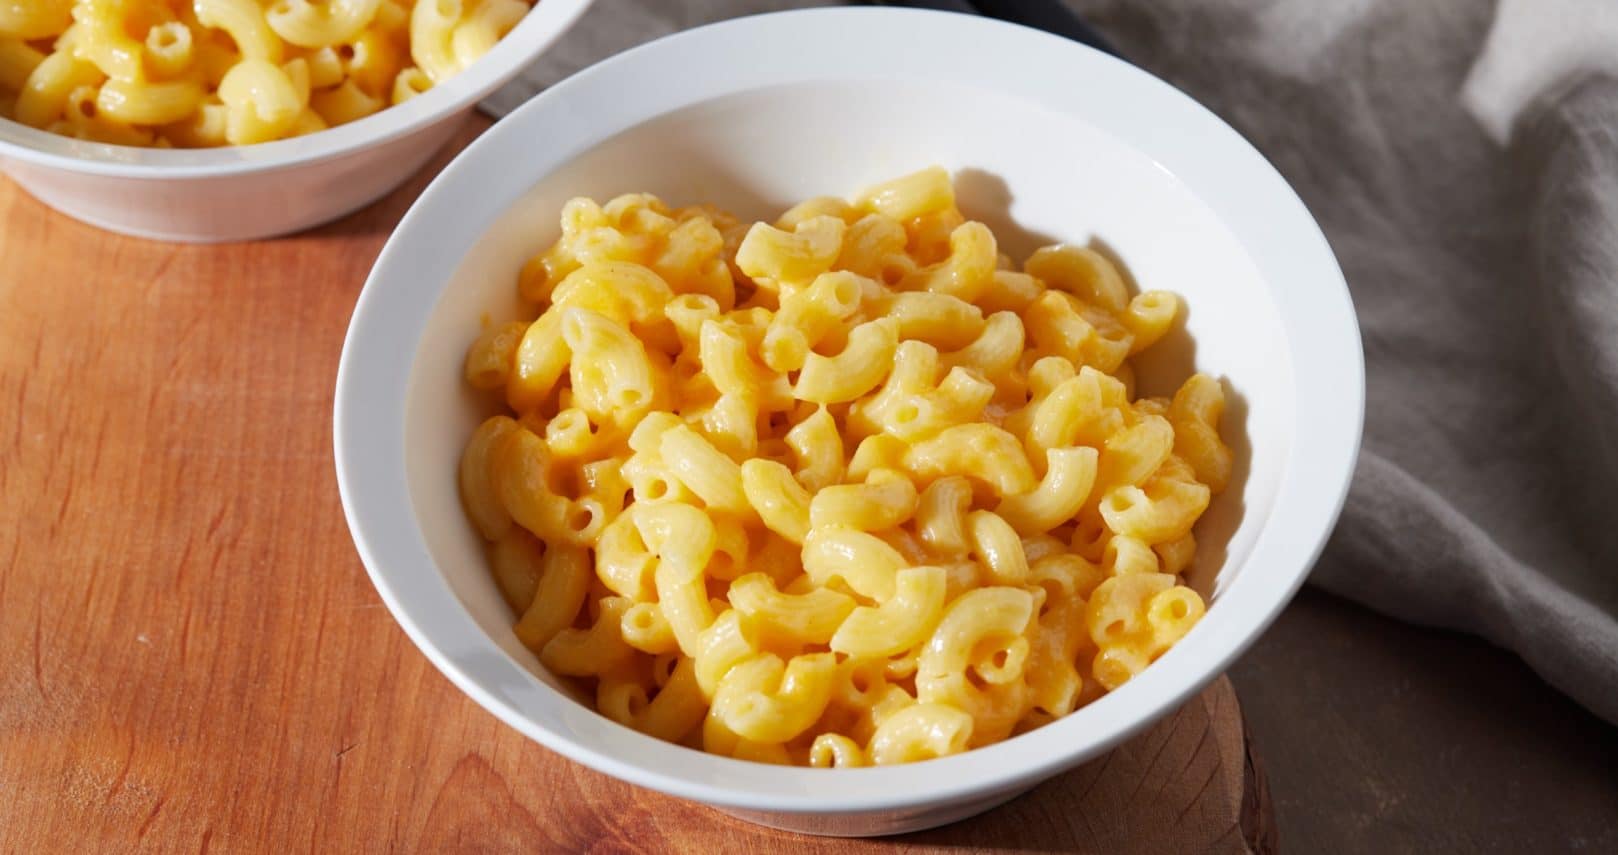 Mikrós mac and cheese